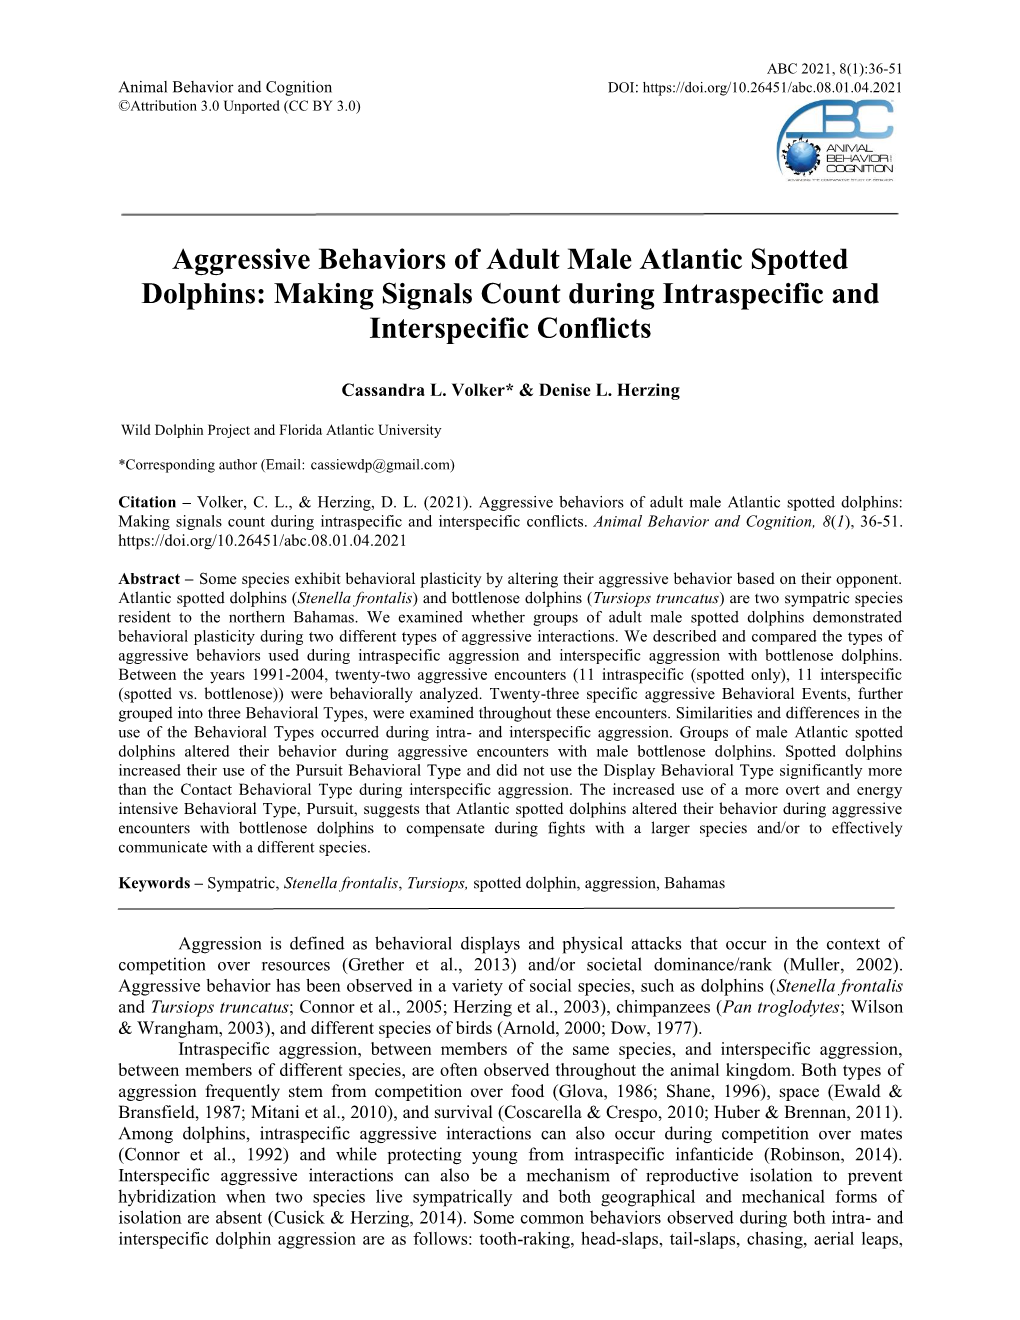 Aggressive Behaviors of Adult Male Atlantic Spotted Dolphins: Making Signals Count During Intraspecific and Interspecific Conflicts